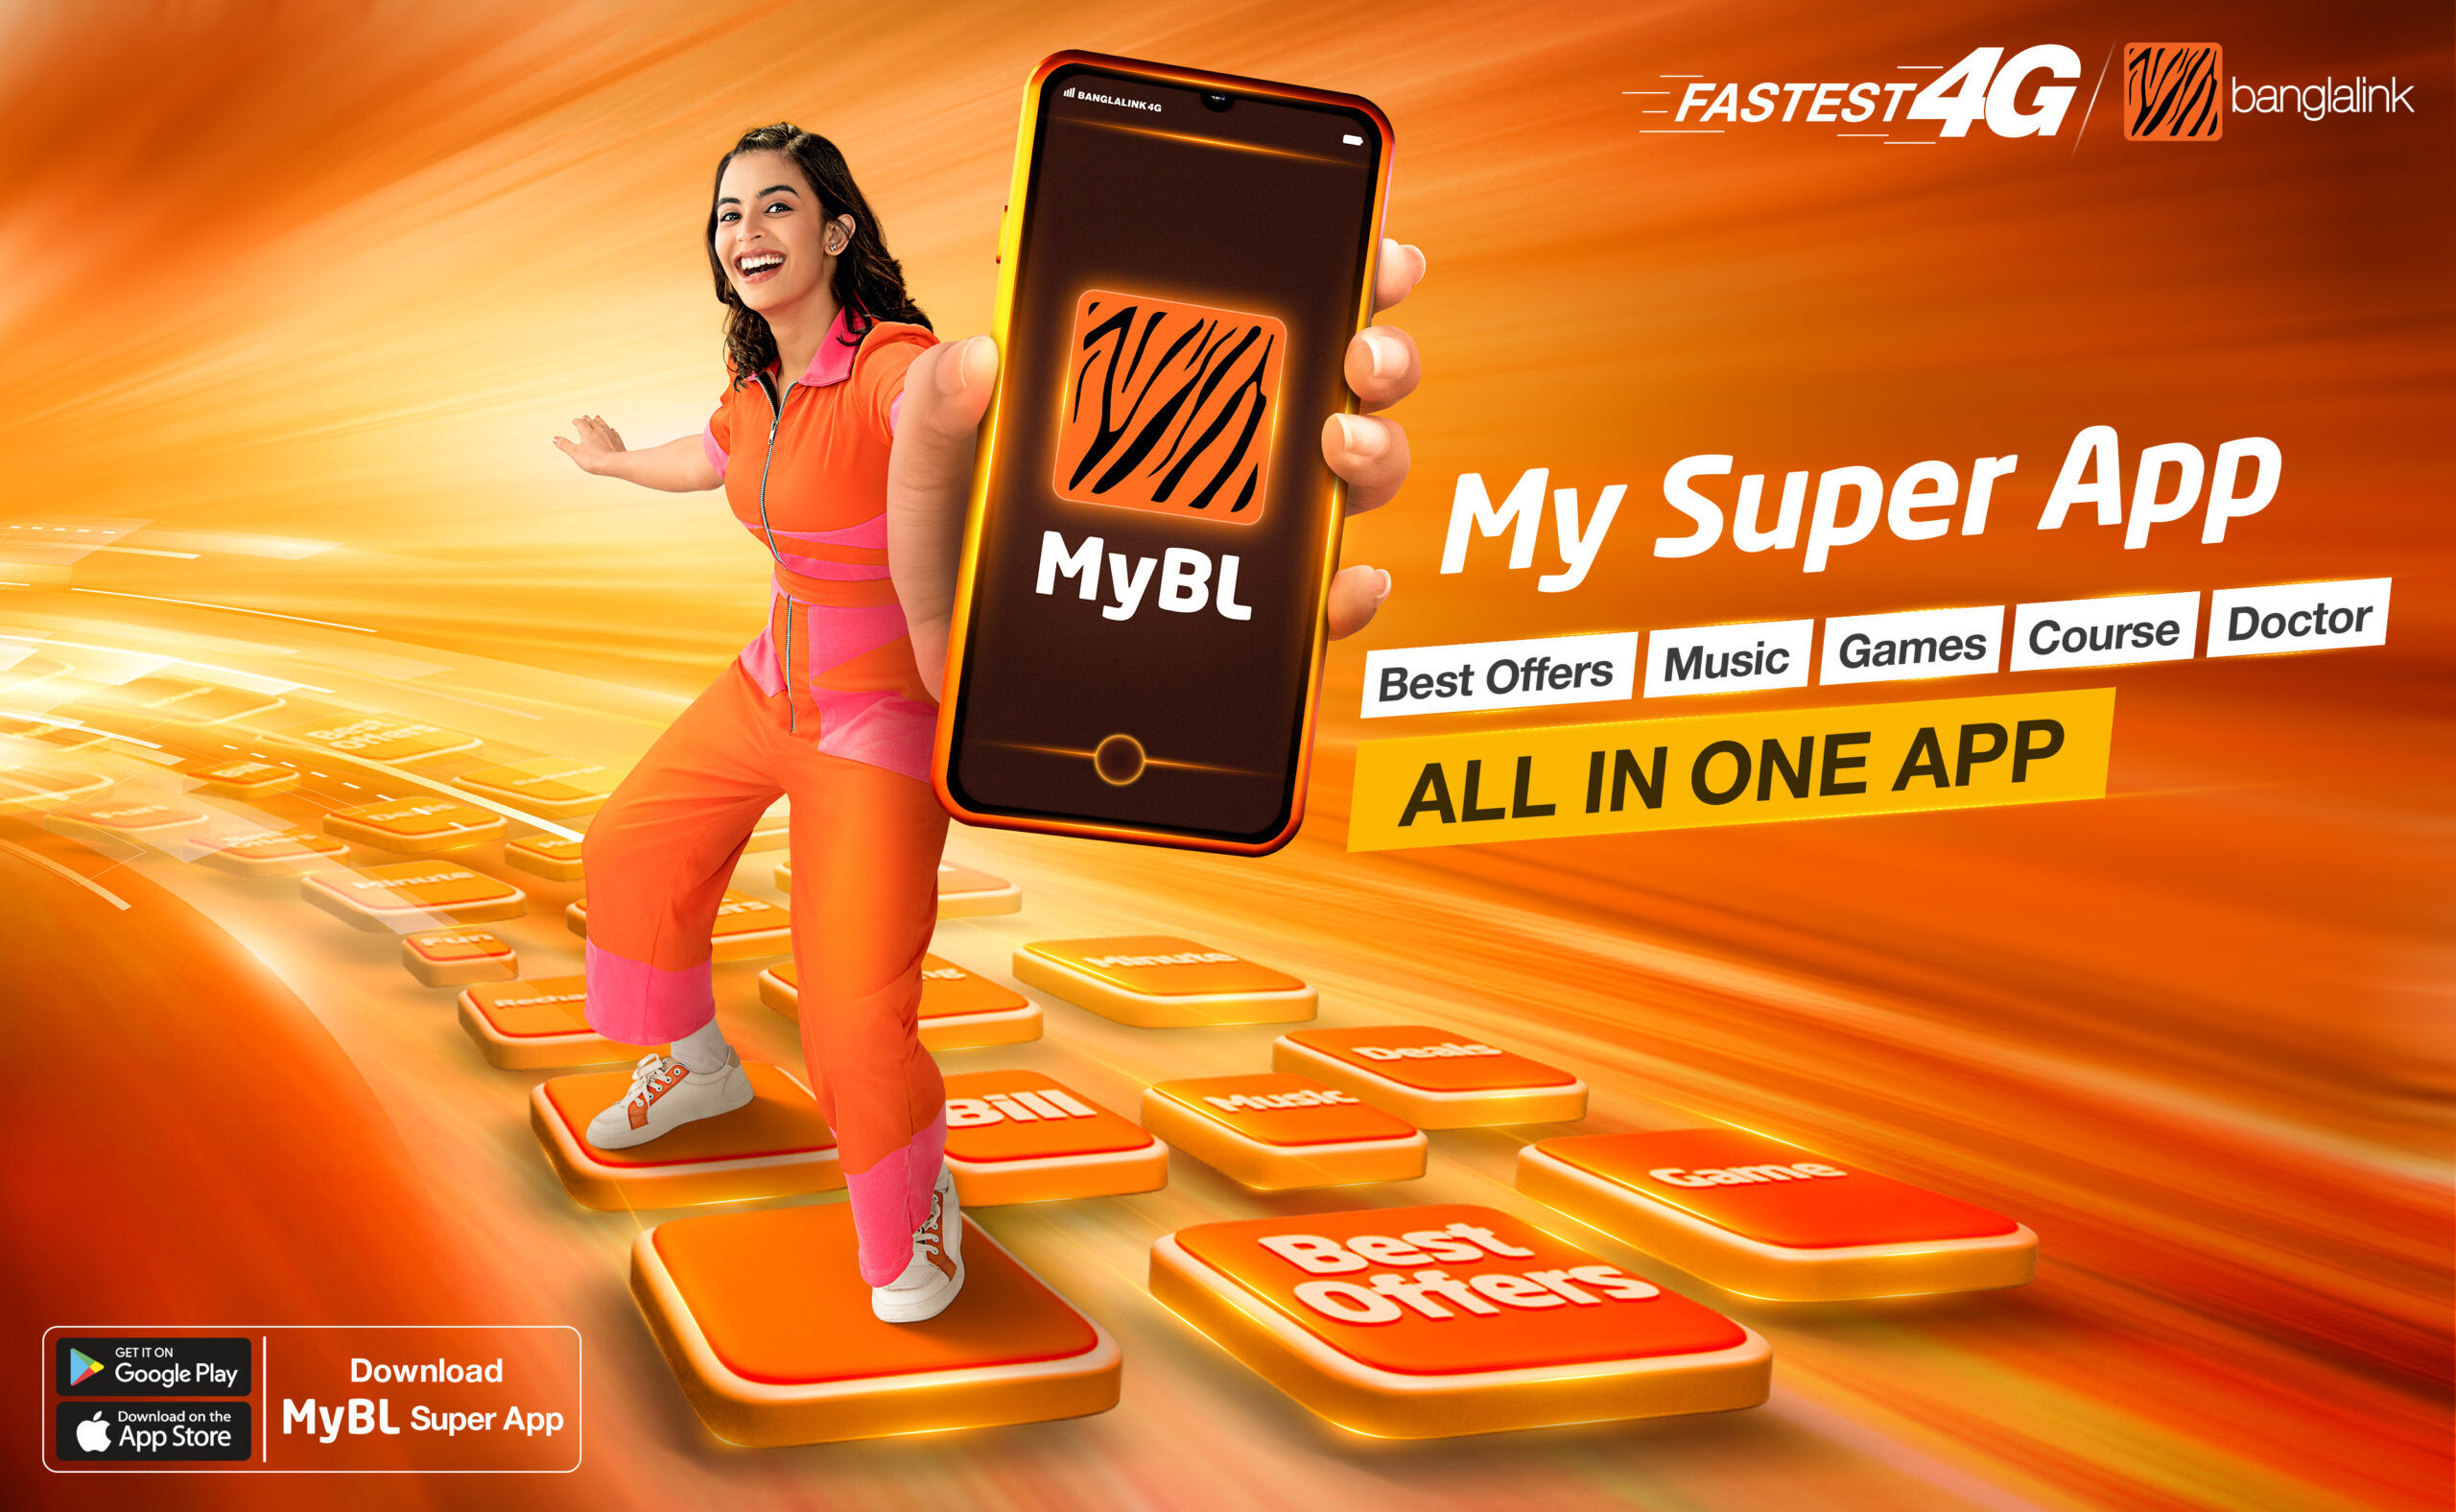 Banglalink has taken a leap forward in its digital services portfolio with the relaunch of its popular app, MyBL, as the first-ever telco super app in Bangladesh-Markedium